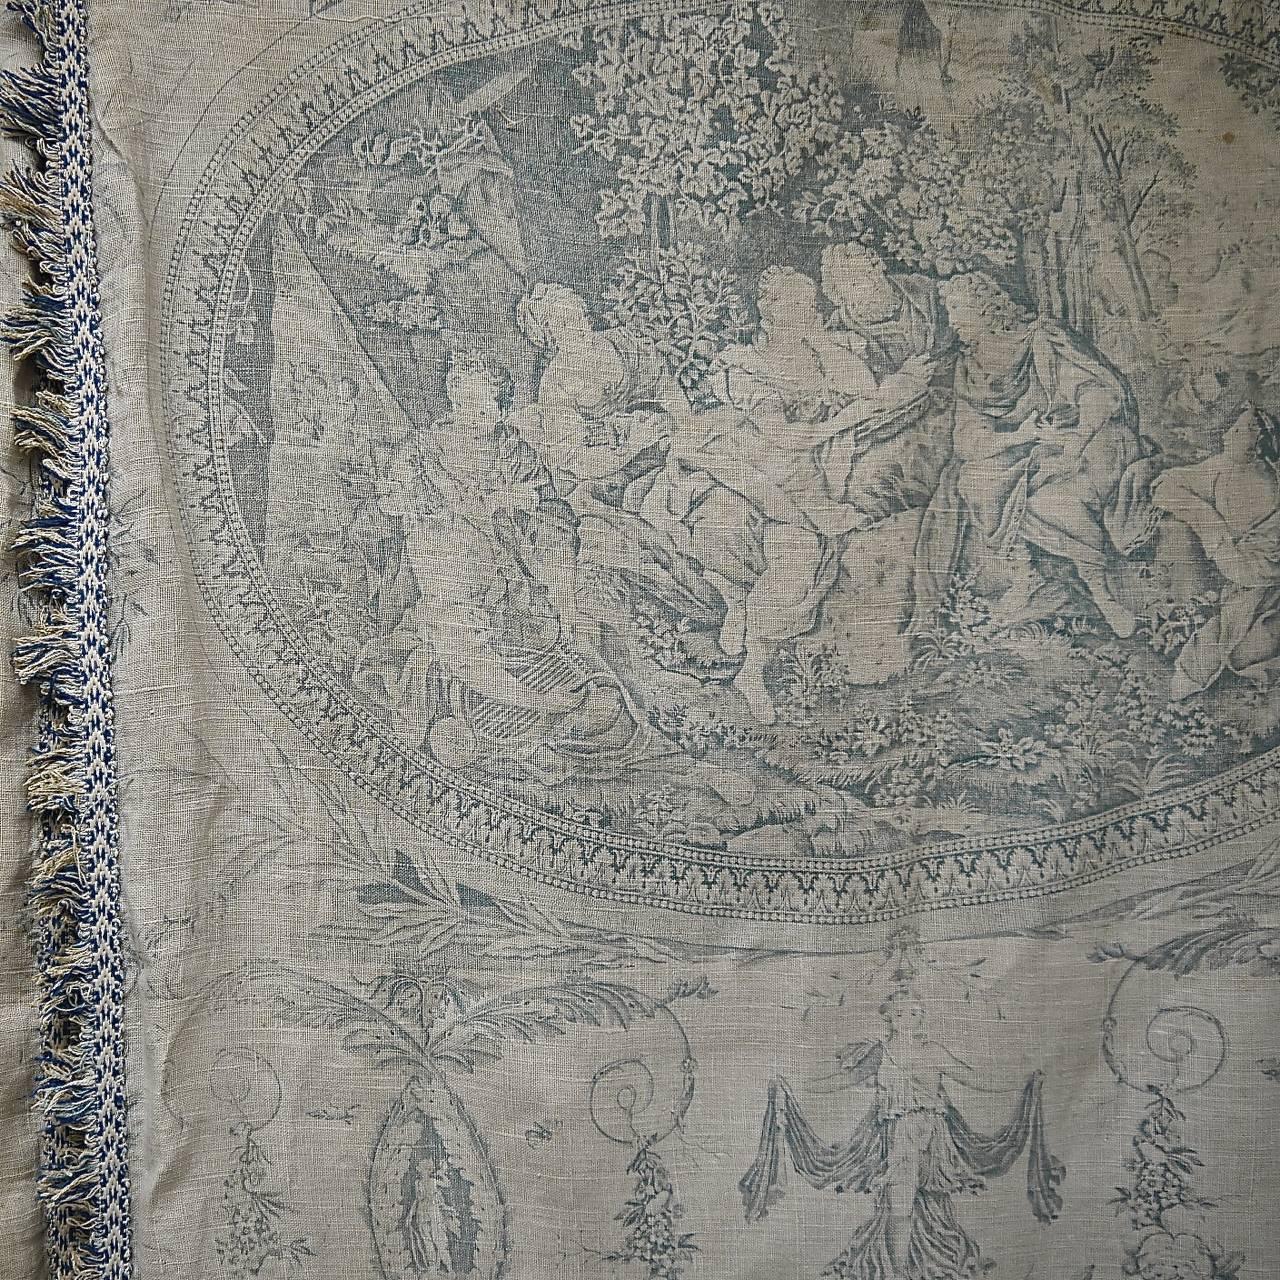 19th Century Pair of Faded Blue Toile de Jouy Linen Curtains Antique French